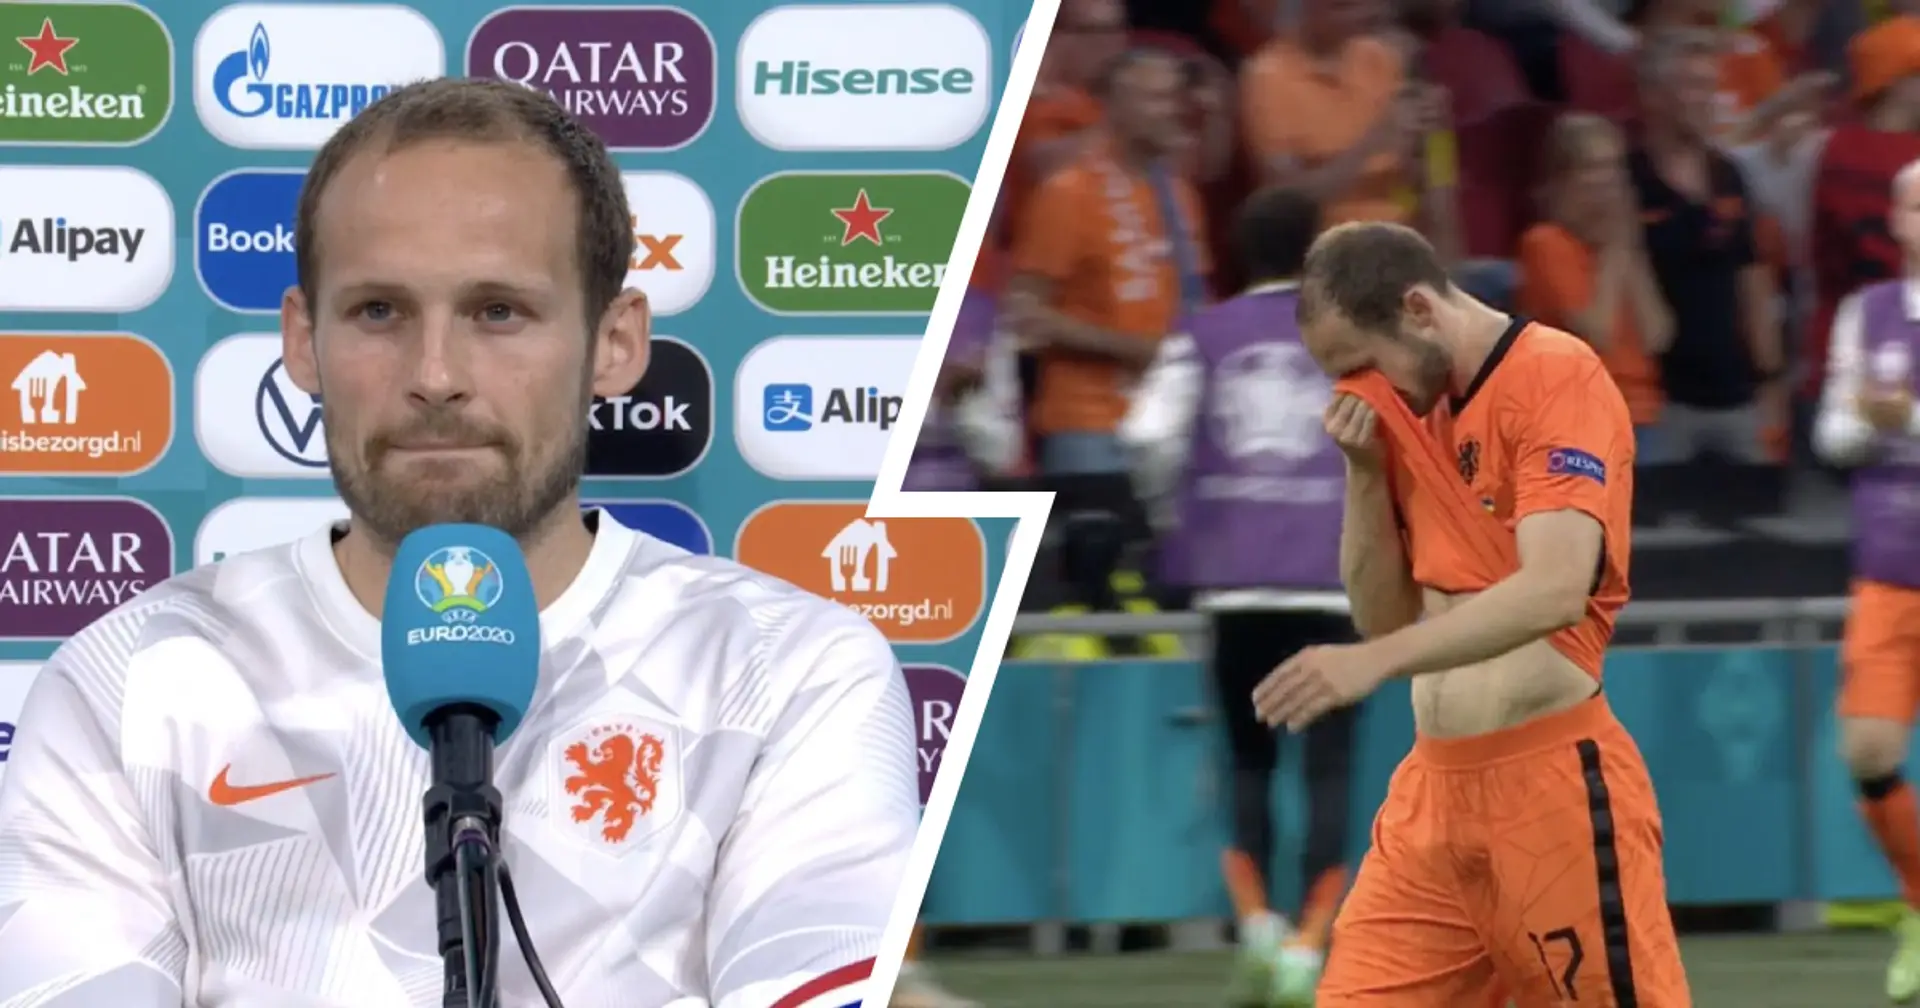 Daley Blind considered not playing at Euro 2020 after Christian Eriksen incident